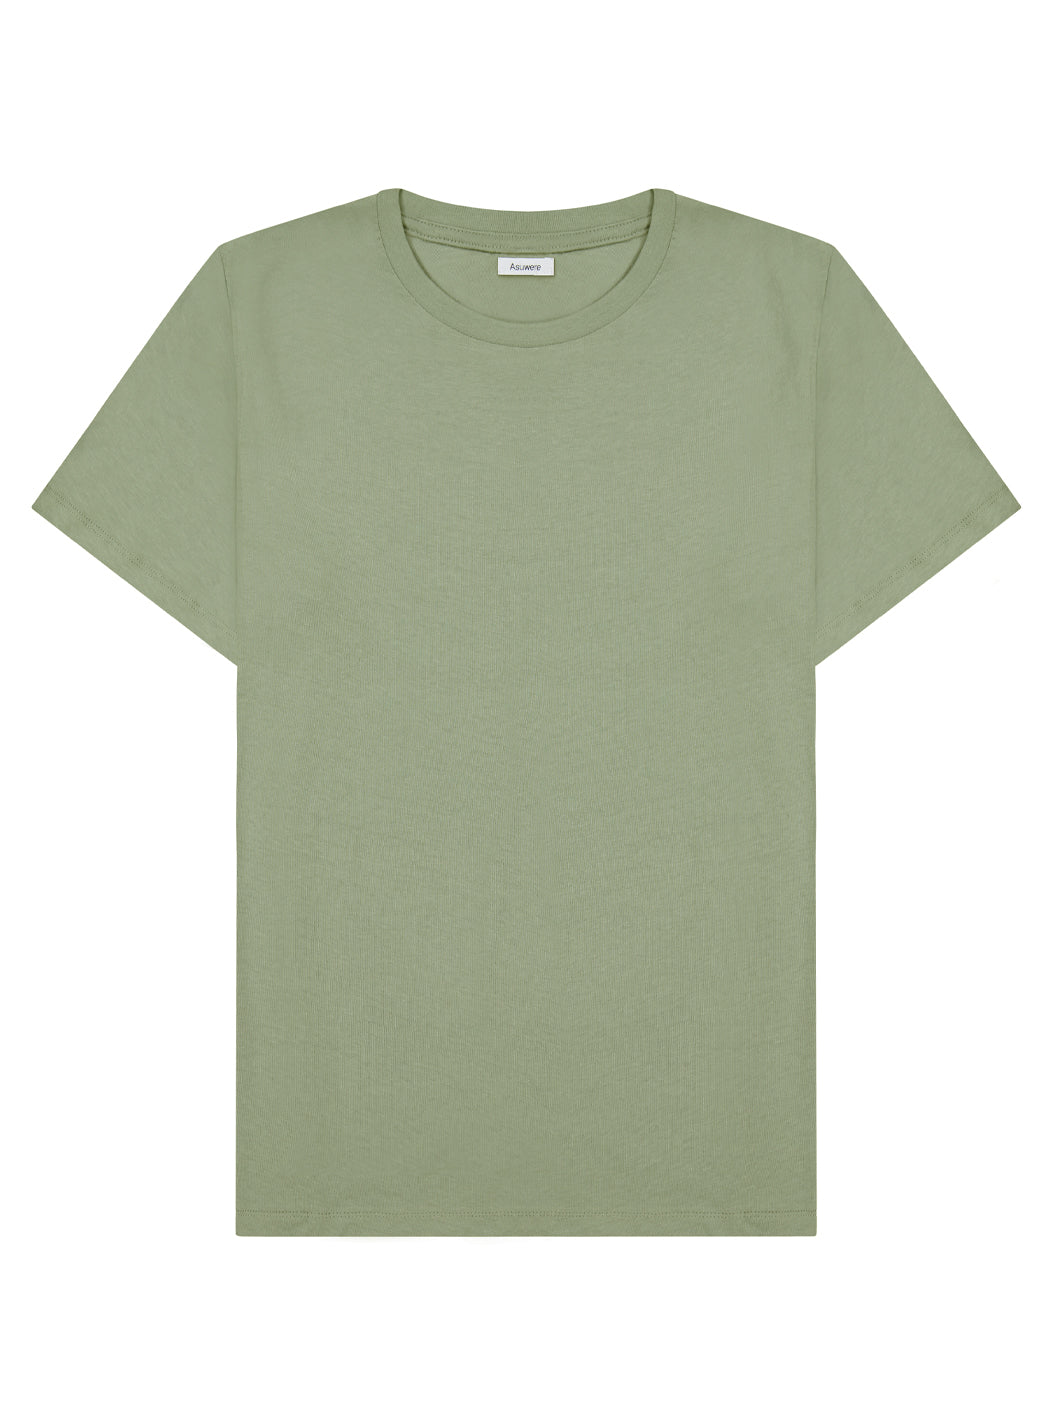 Flat image of Recycled Cotton Tee in Sage Asuwere